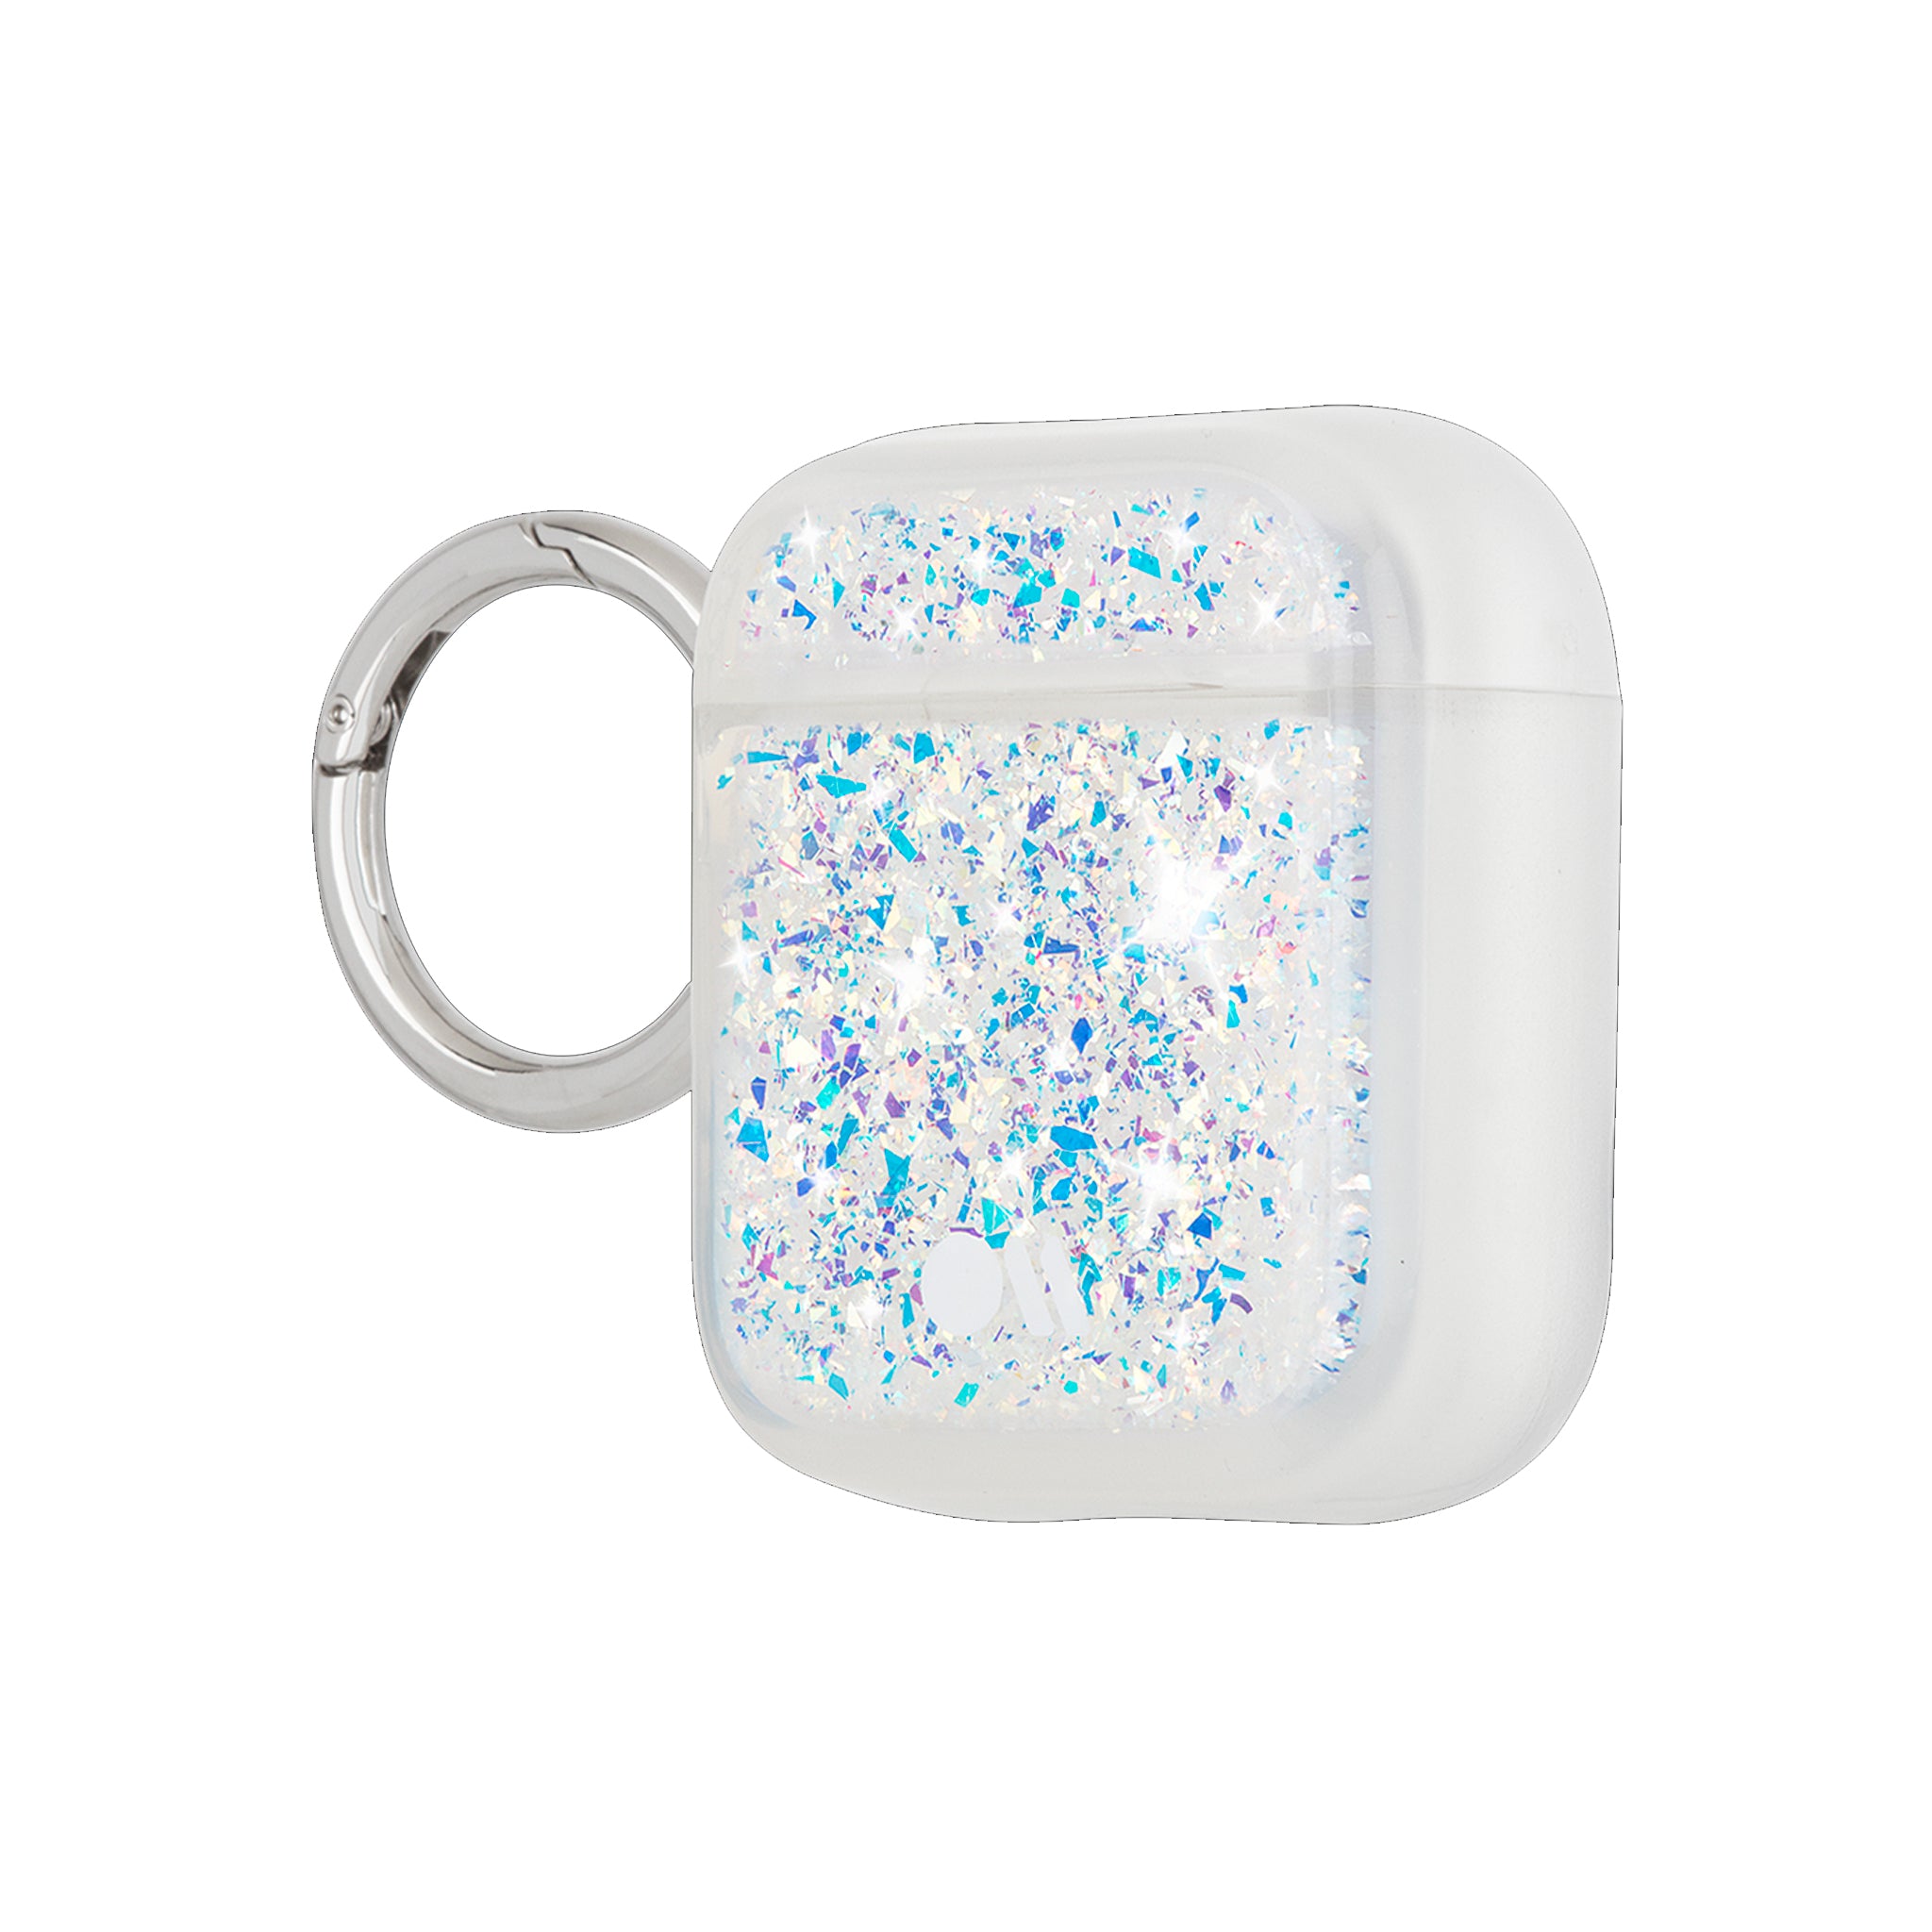 Case-mate - Twinkle Case For Apple Airpods - Stardust